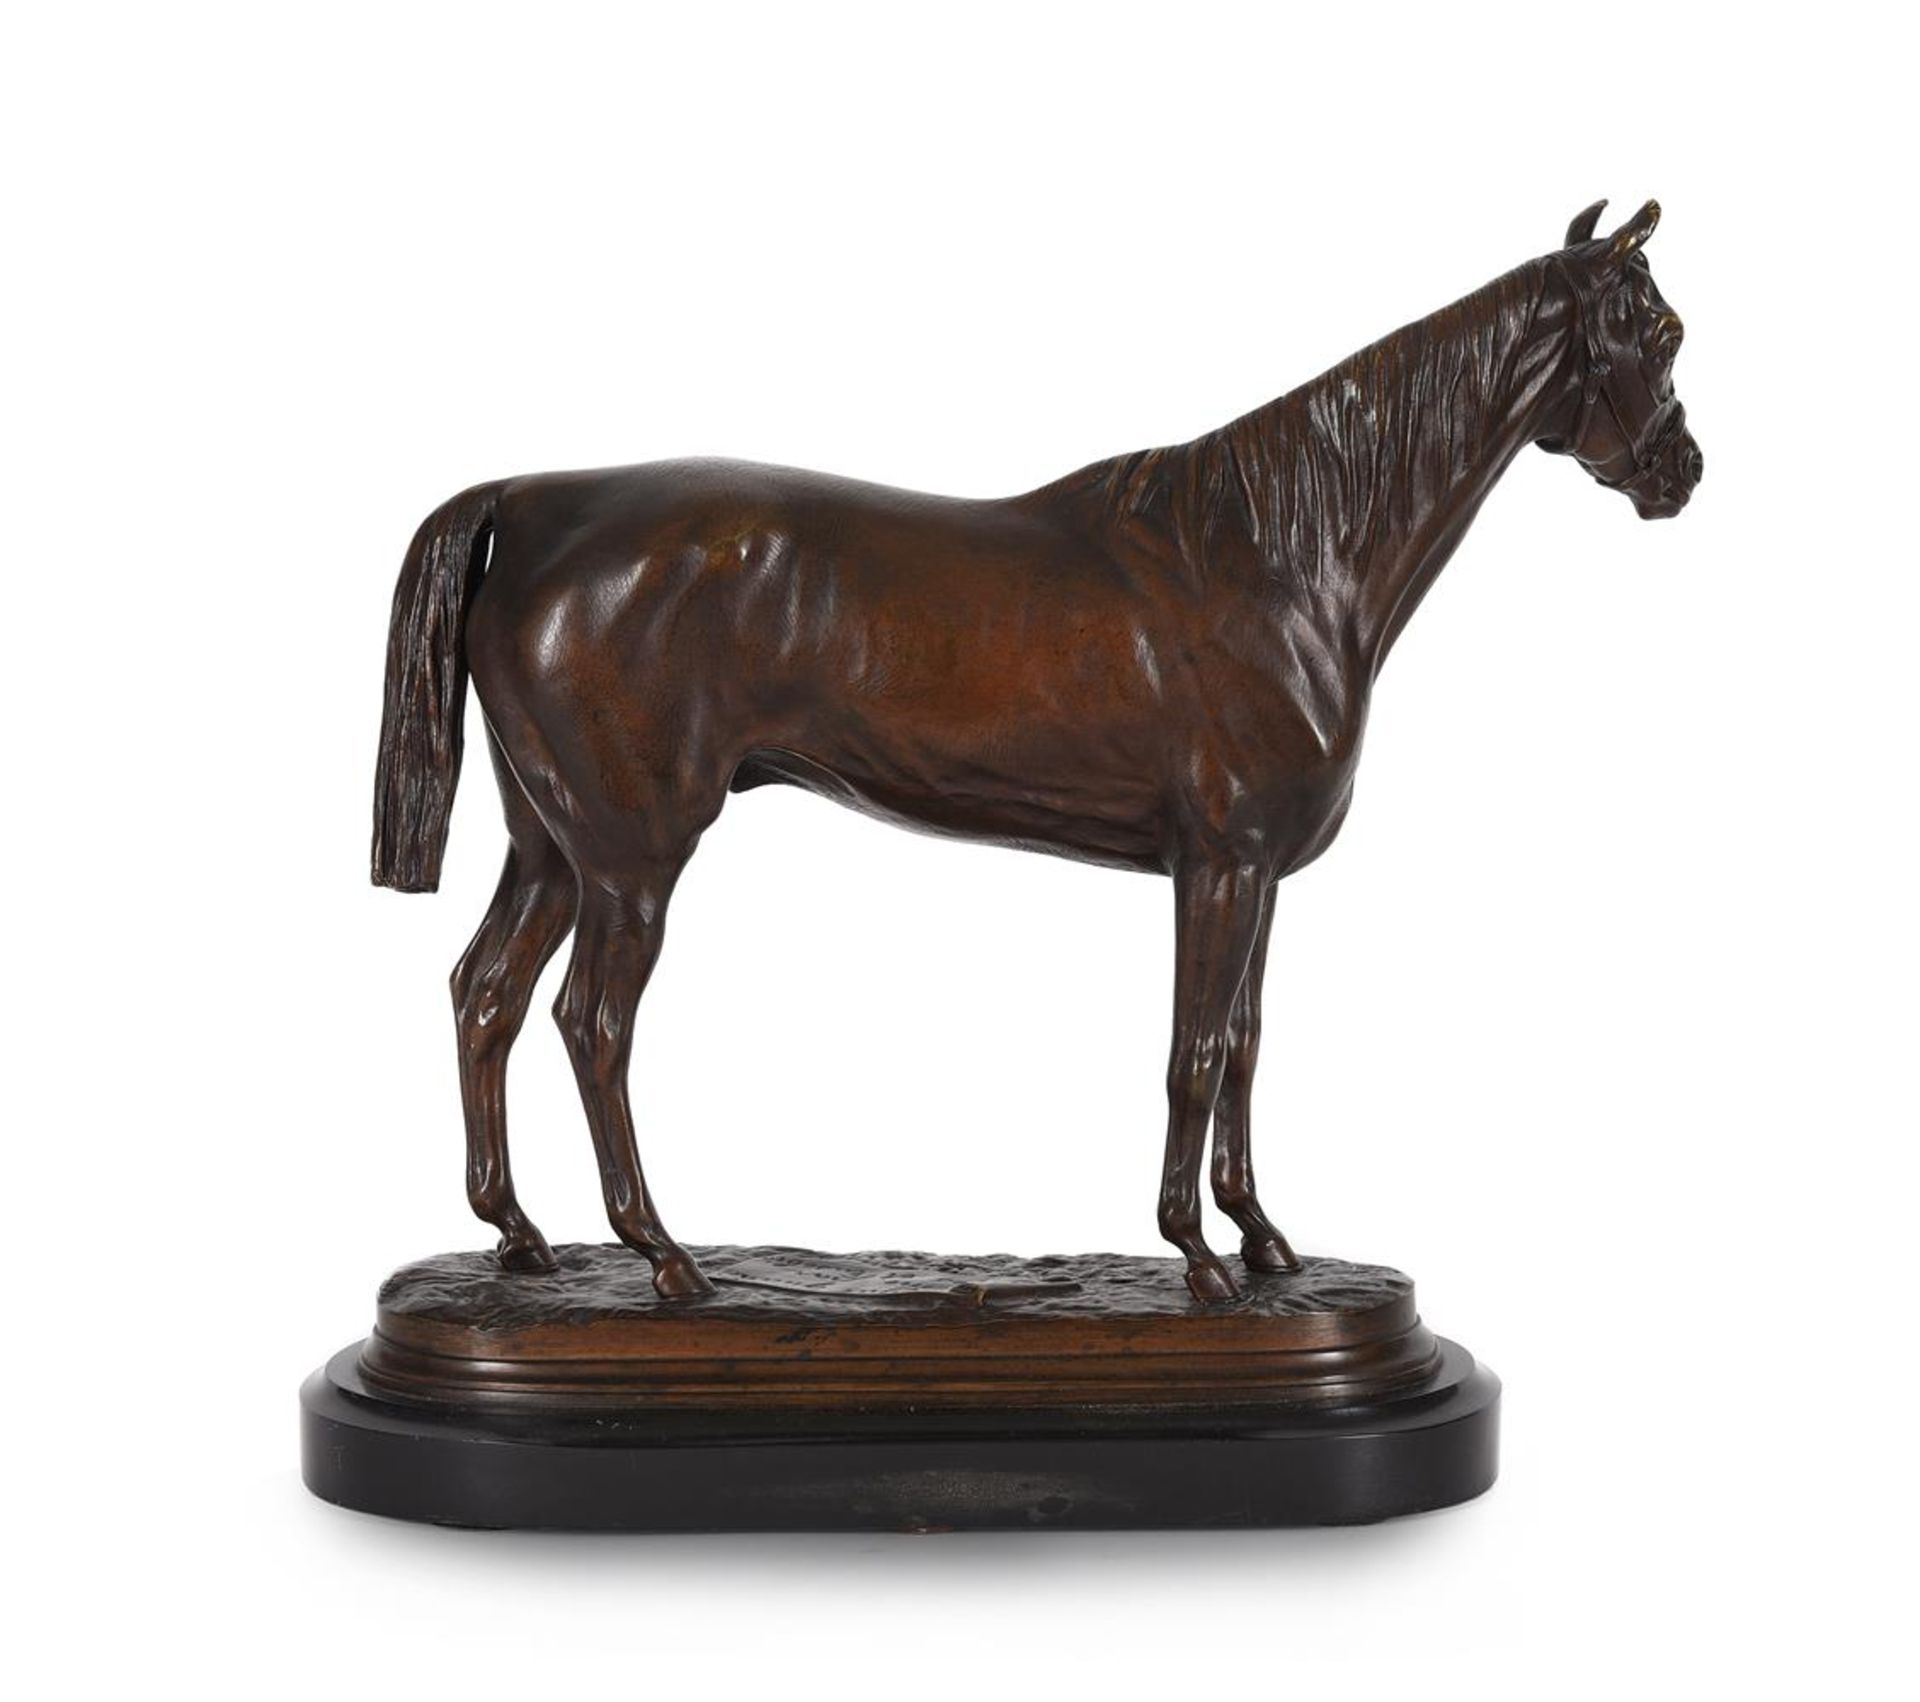 PIERRE LENORDEZ (1815-1892), AN EQUESTRIAN BRONZE OF THE STALLION ROYAL QUAND - Image 2 of 4